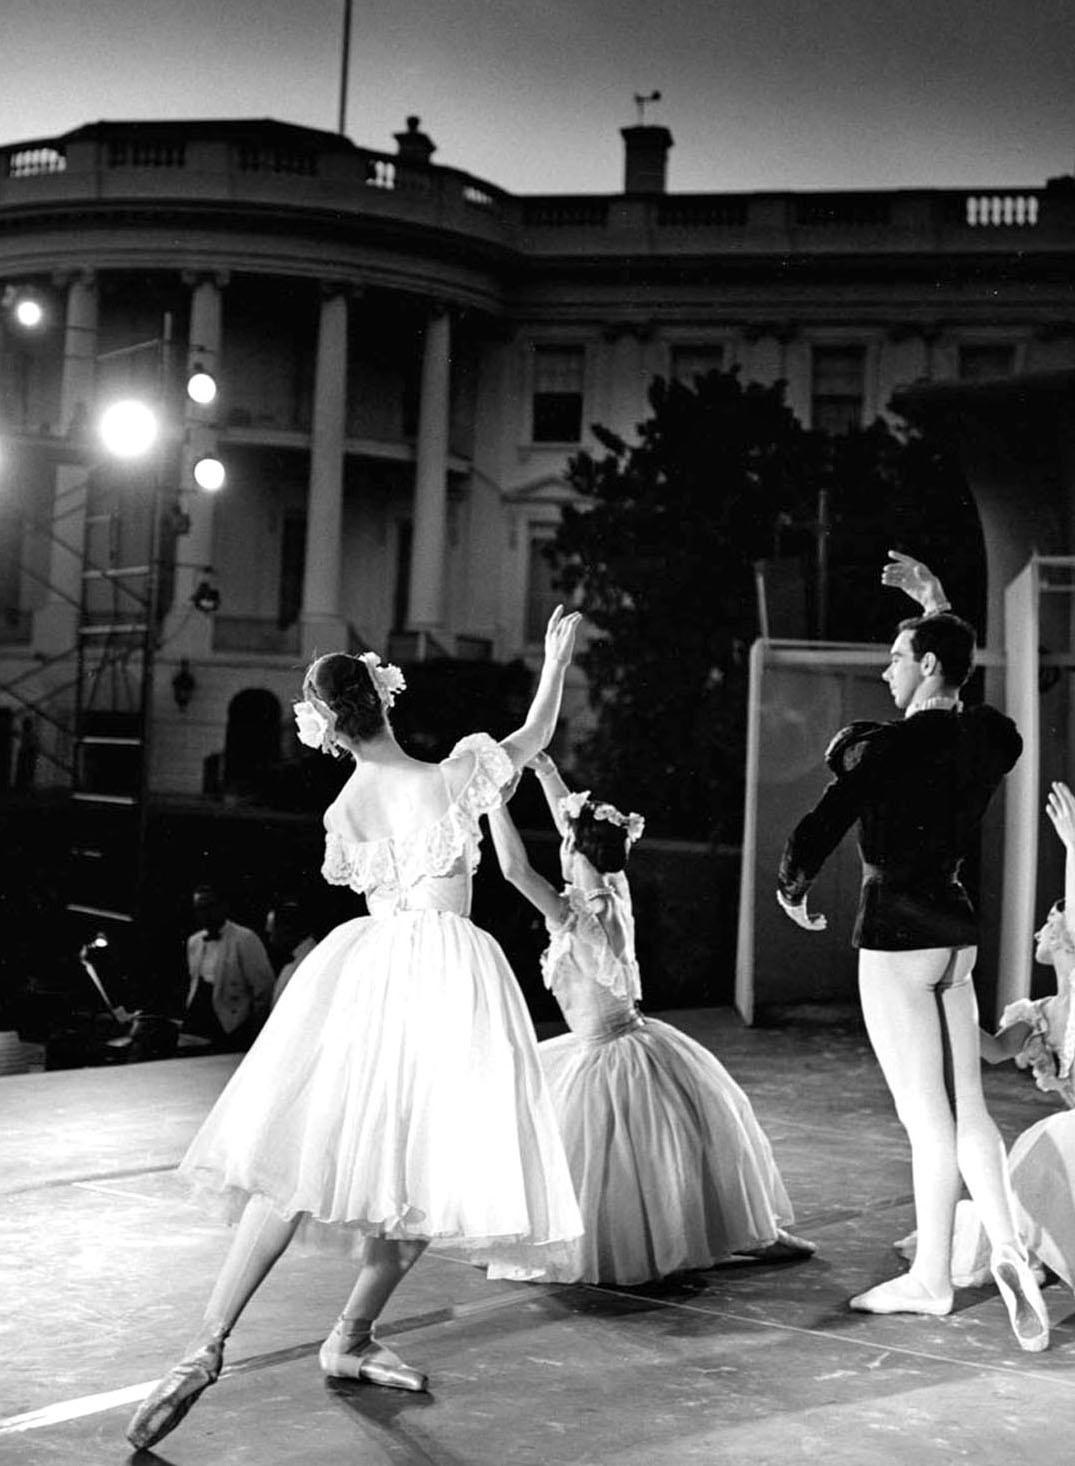  Joffrey Ballet evening outdoor performance at the LBJ White House Arts Festival - Photograph by Jack Mitchell